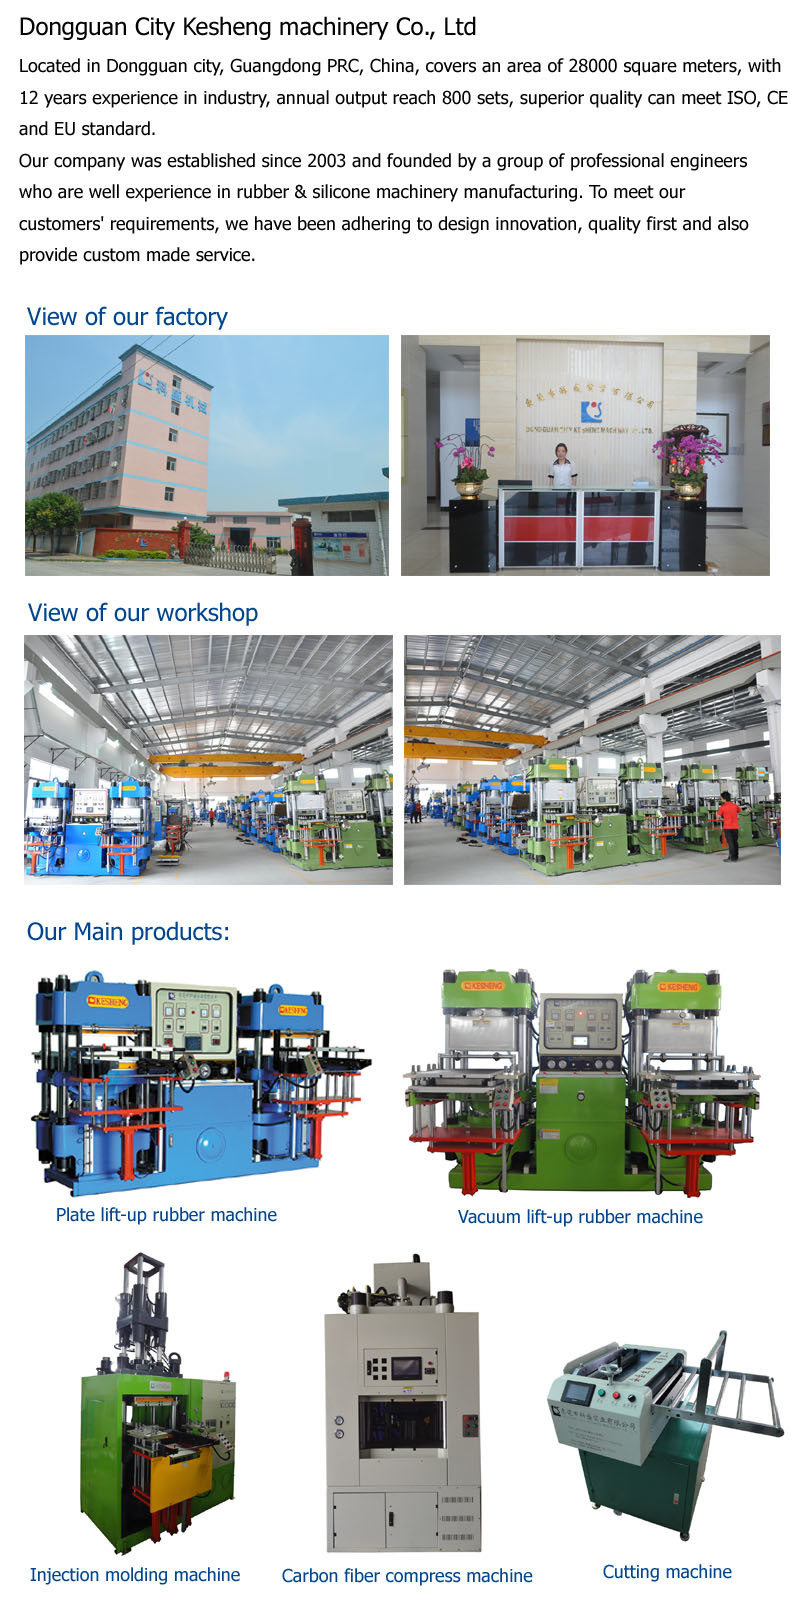 Hydraulic Press Machine for Rubber Sheets, Soles&Mat Products (KS300VF)